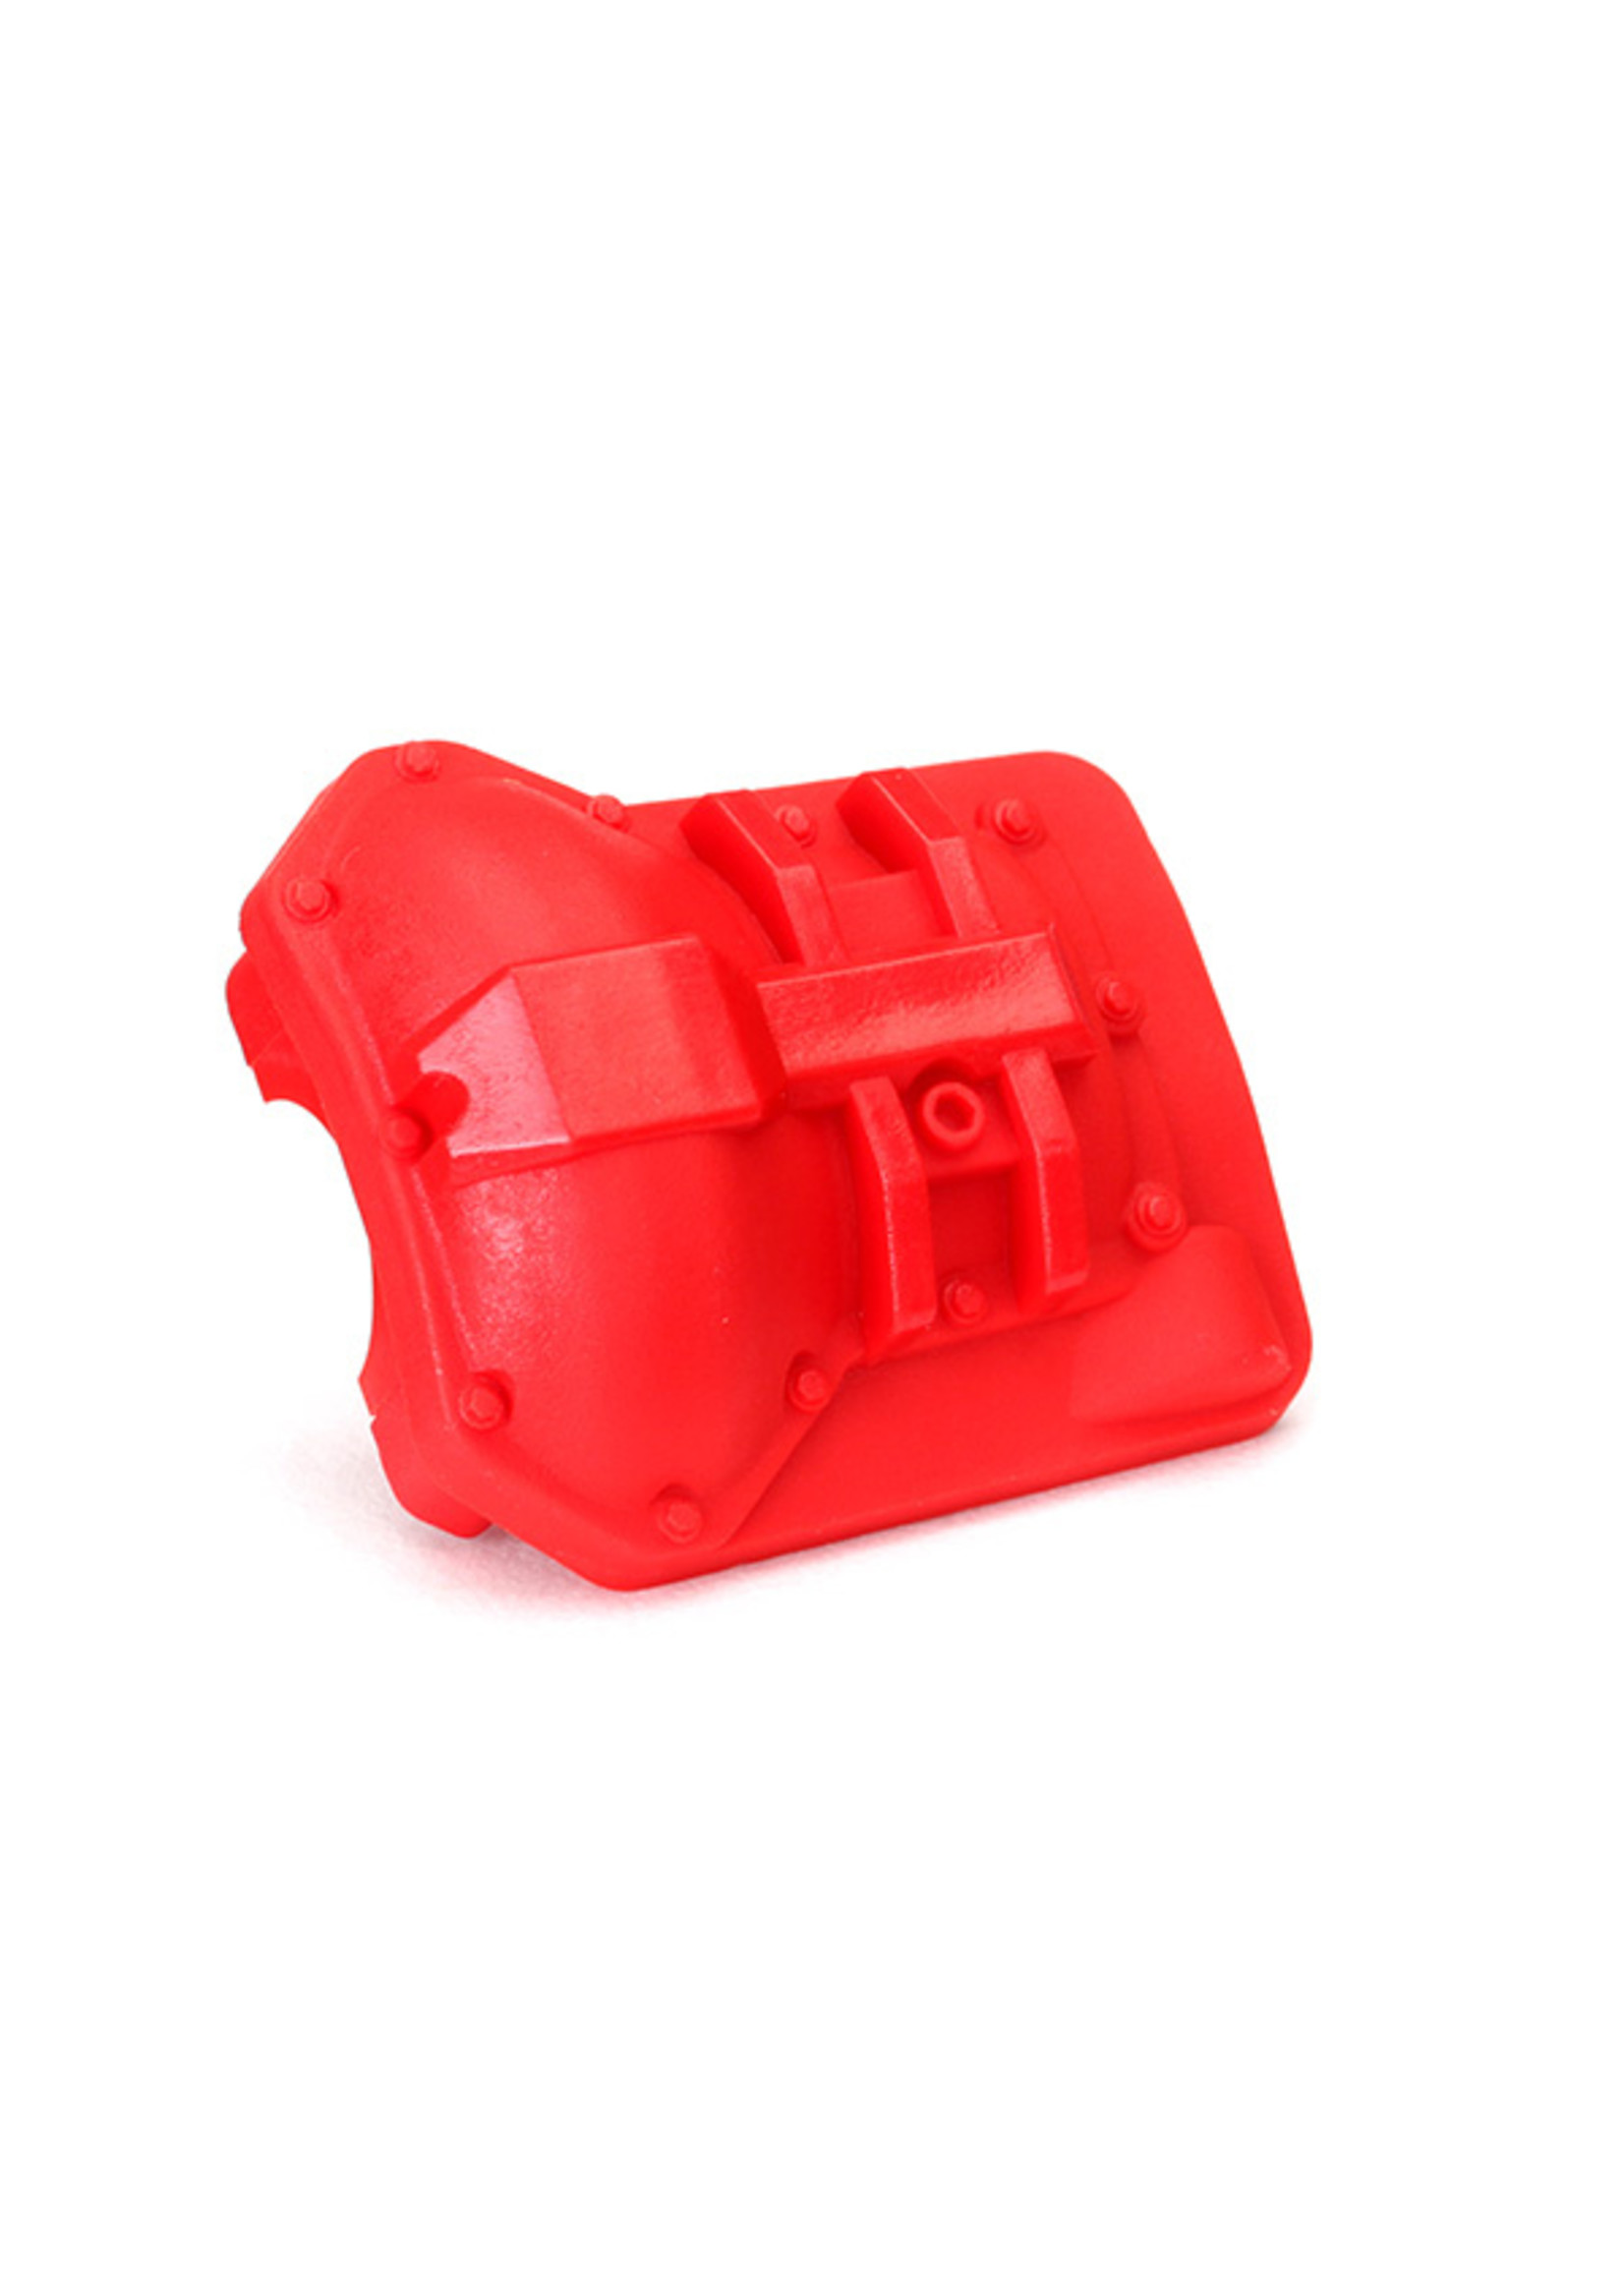 Traxxas 8280R - Differential Cover - Red